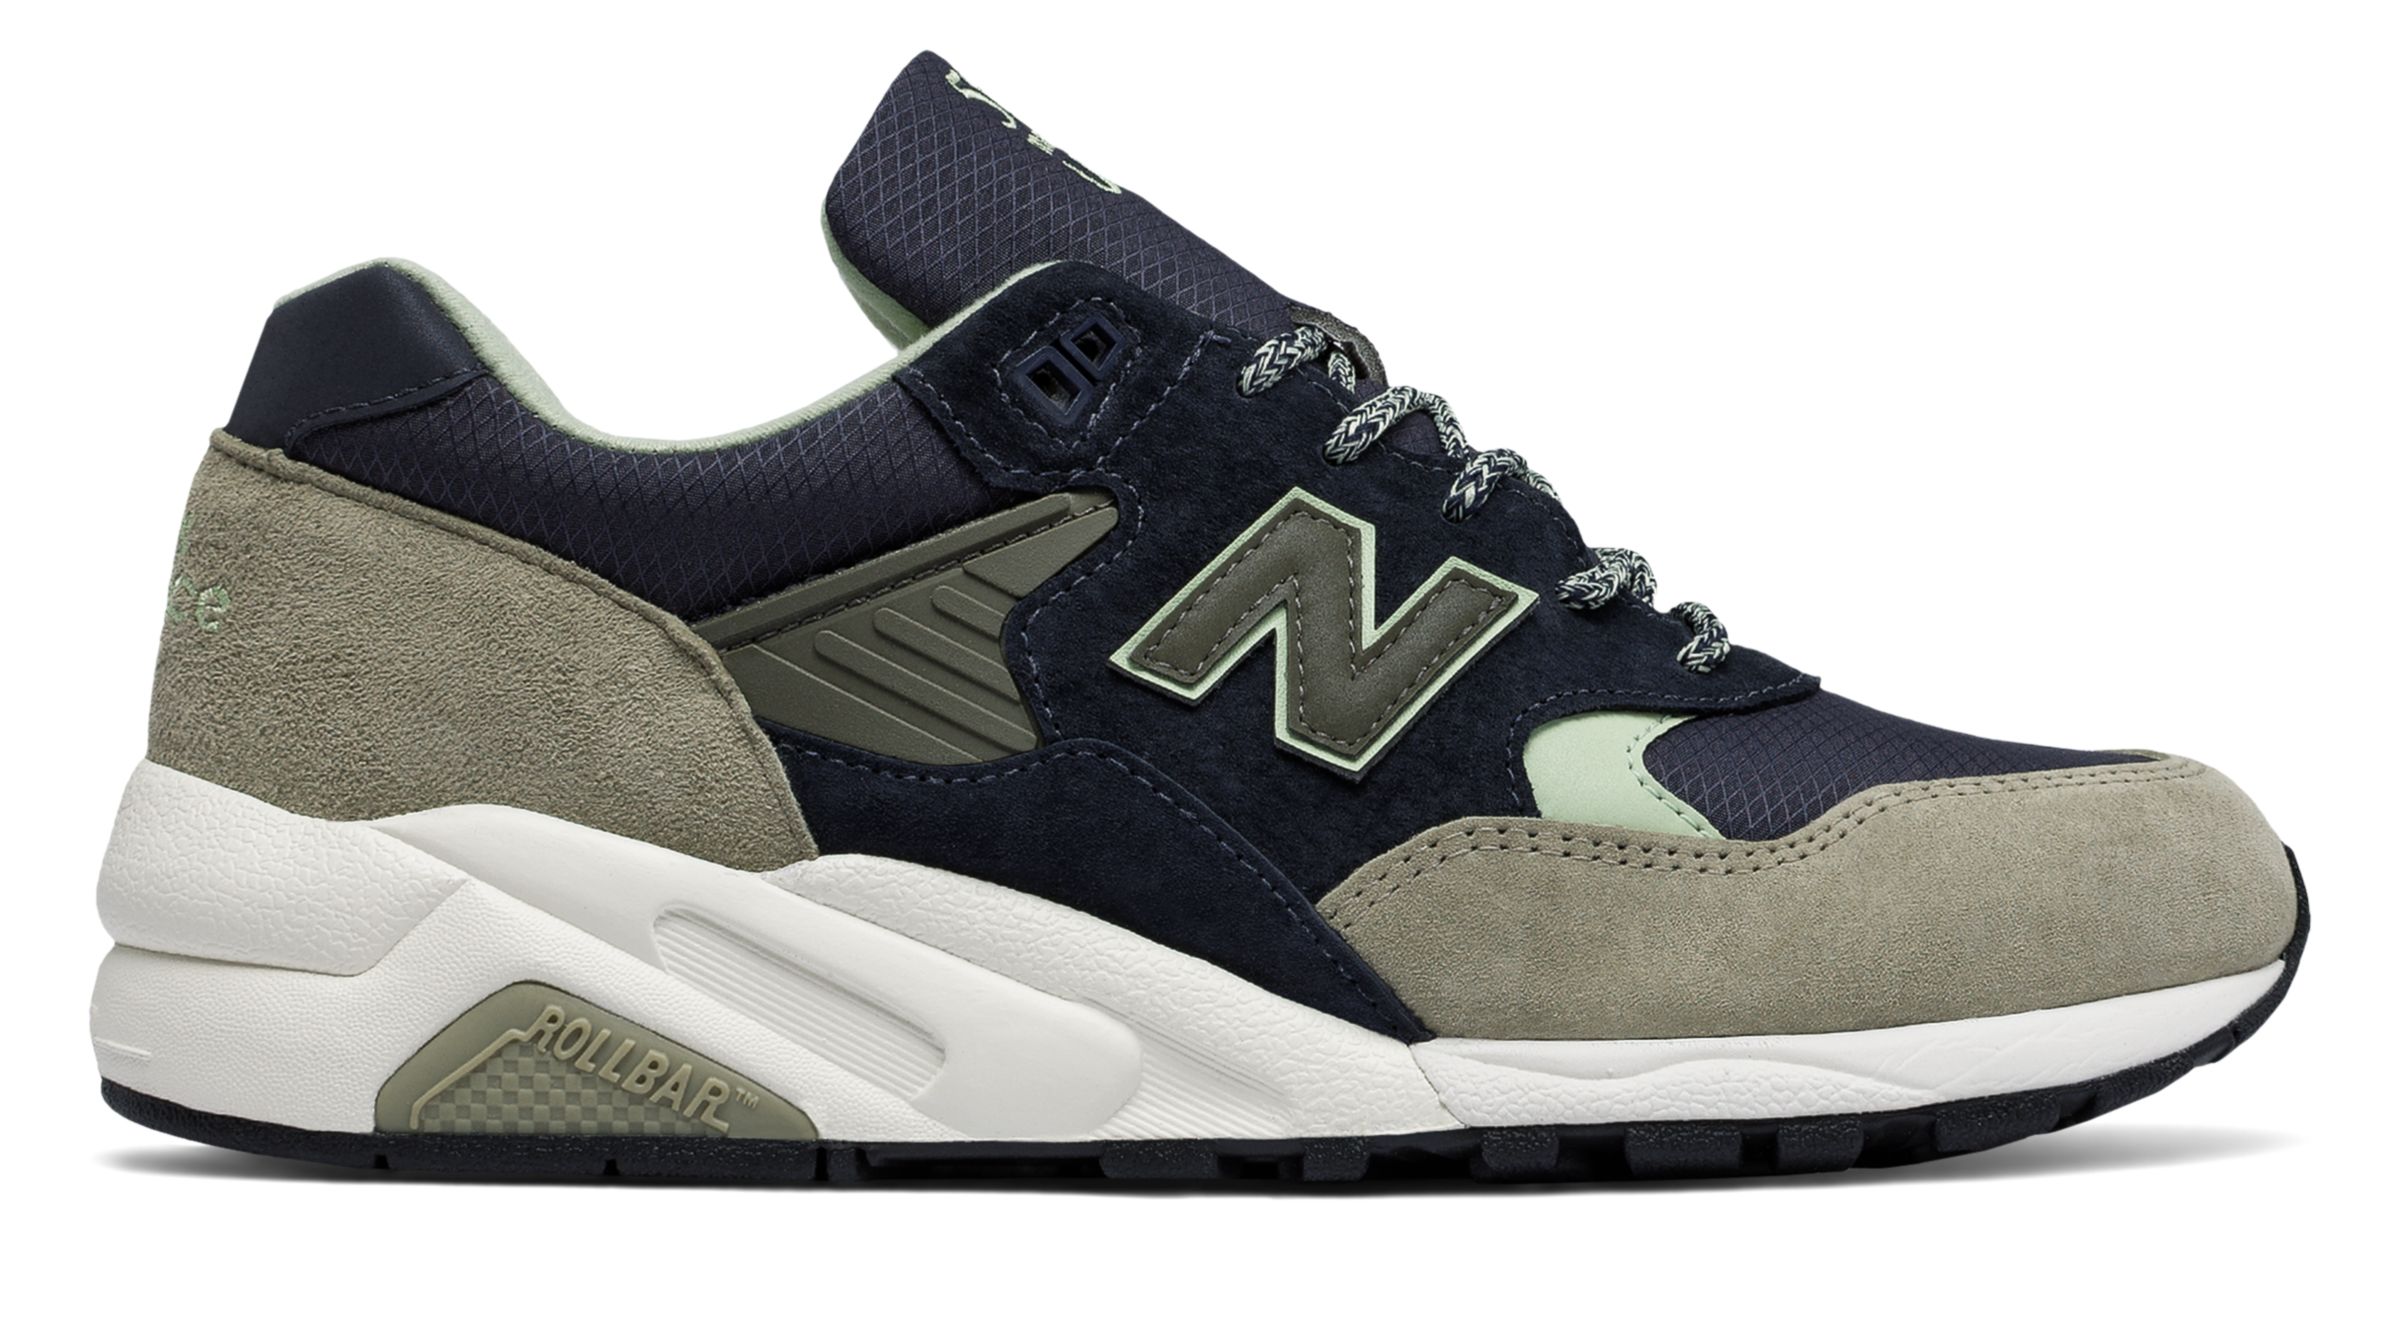 585 Made in USA - Men's 585 - Classic, - New Balance